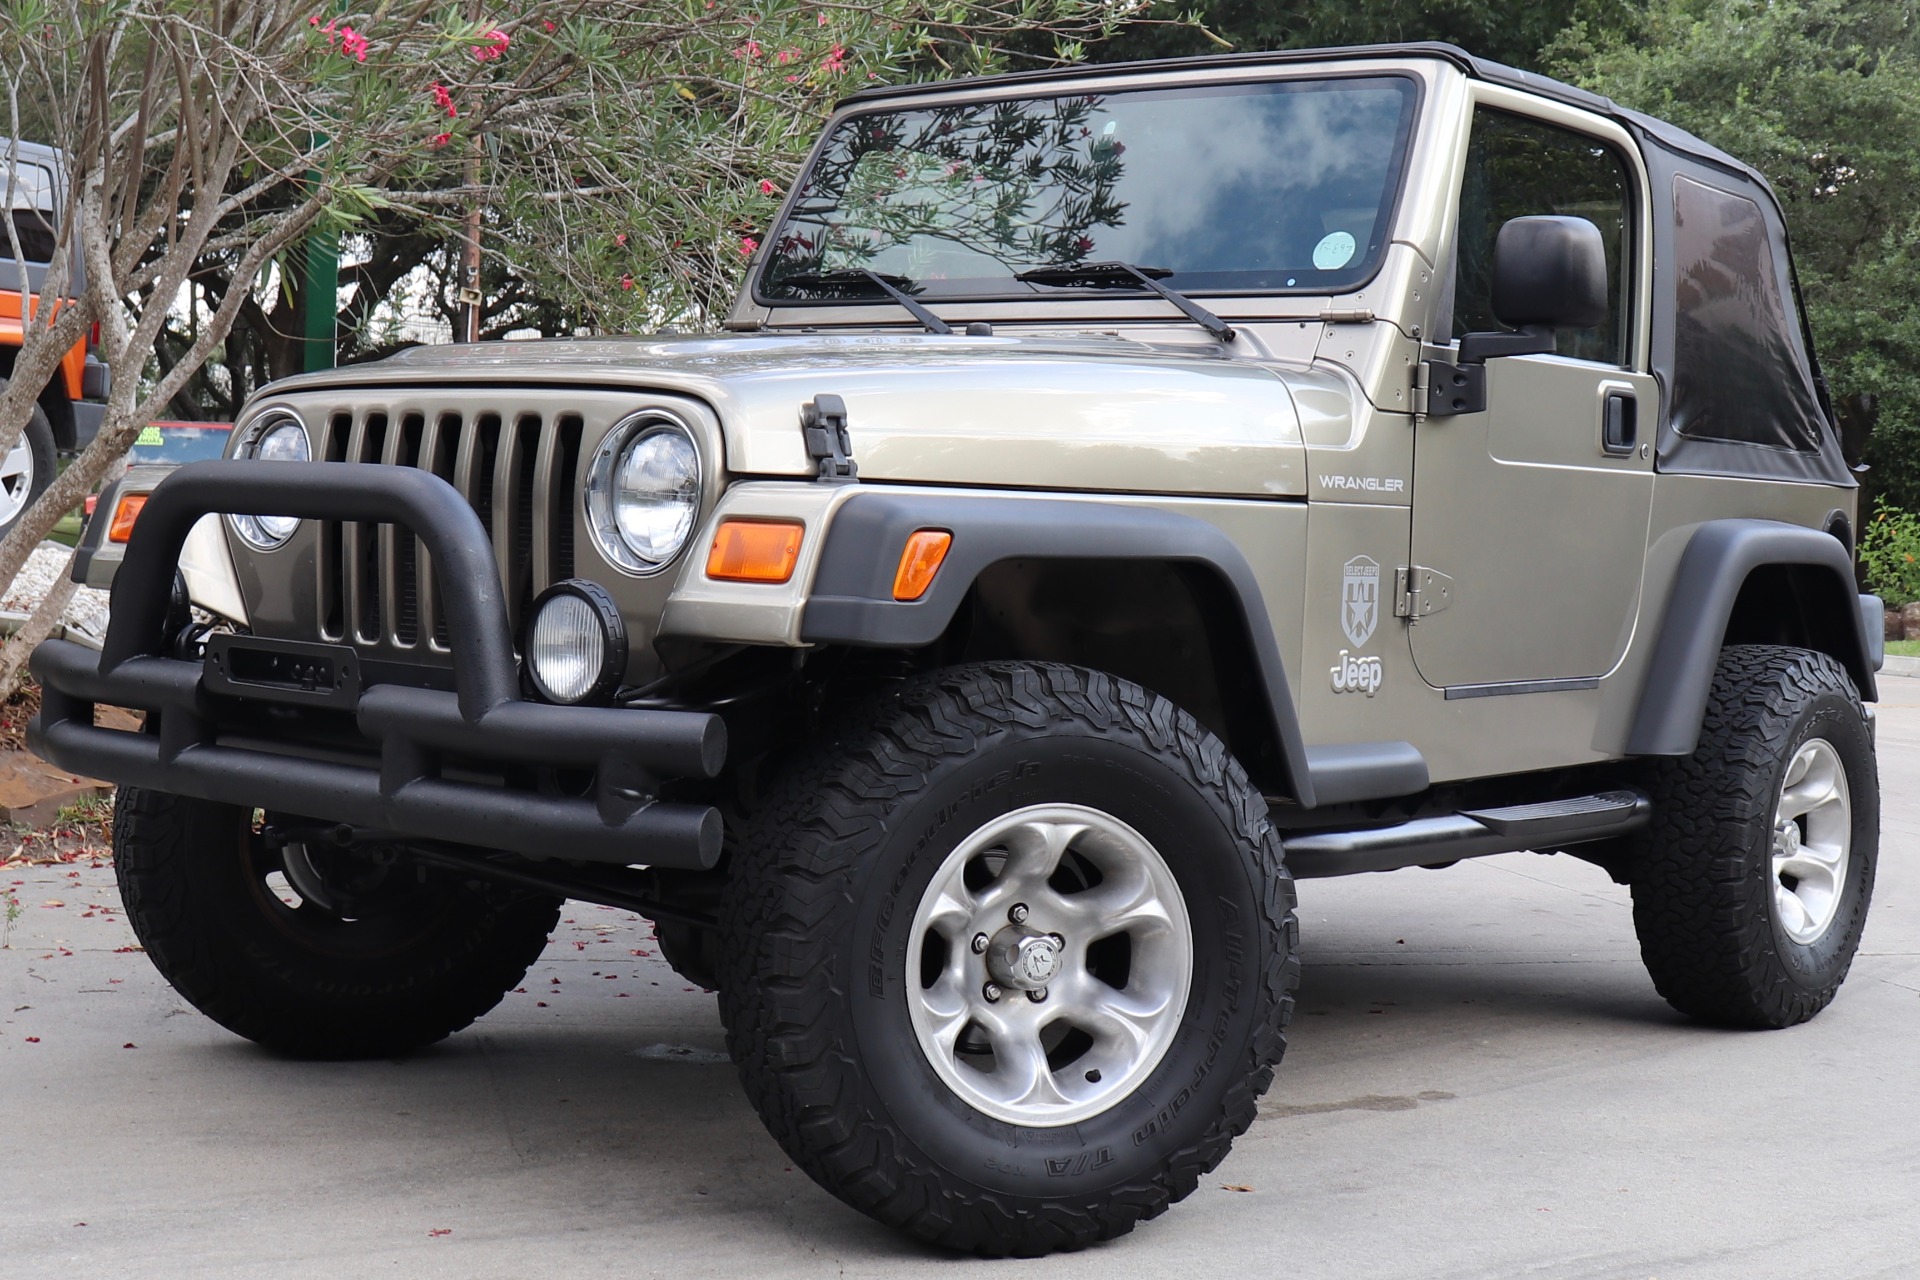 Used 2003 Jeep Wrangler Sport For Sale ($16,995) | Select Jeeps Inc